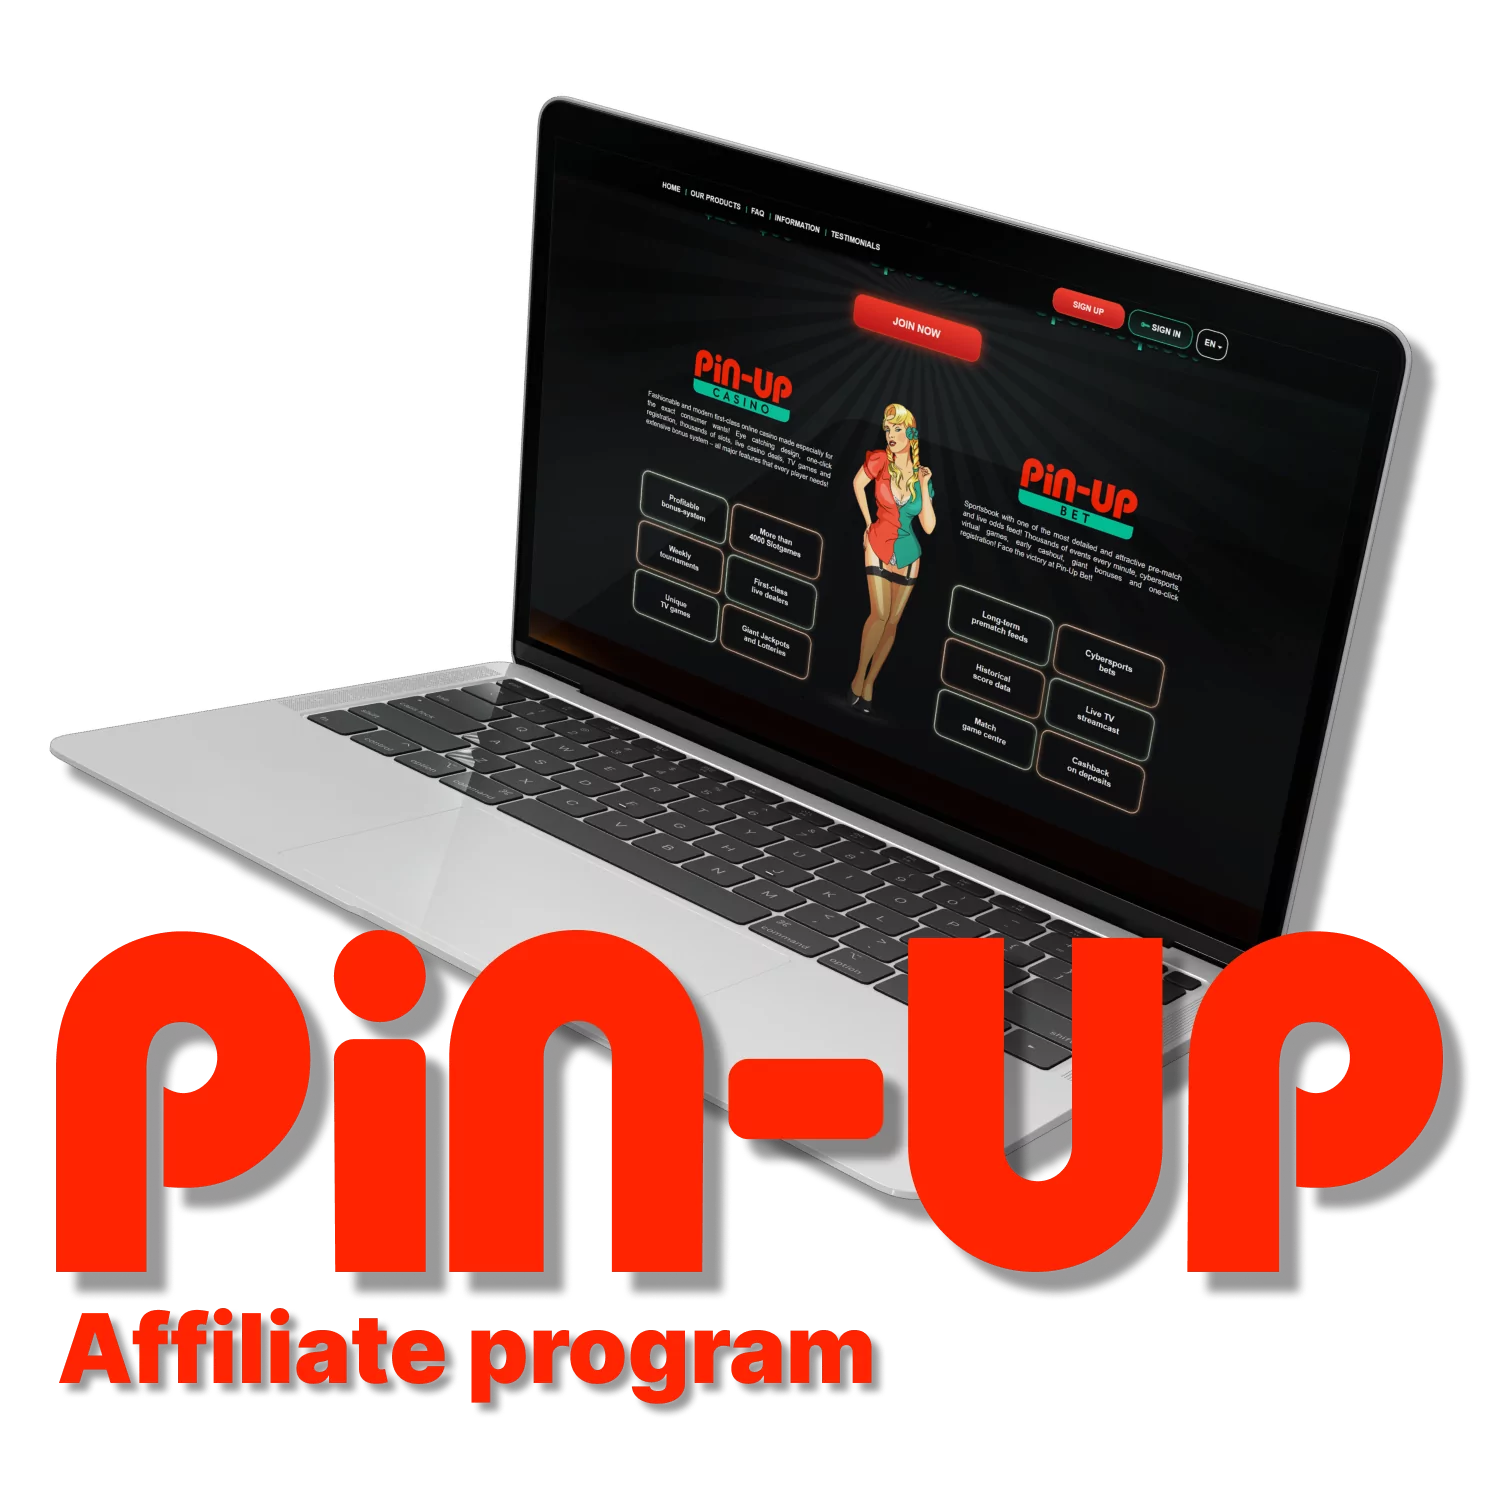 How To Handle Every pin-up casino entrance to your personal account Challenge With Ease Using These Tips